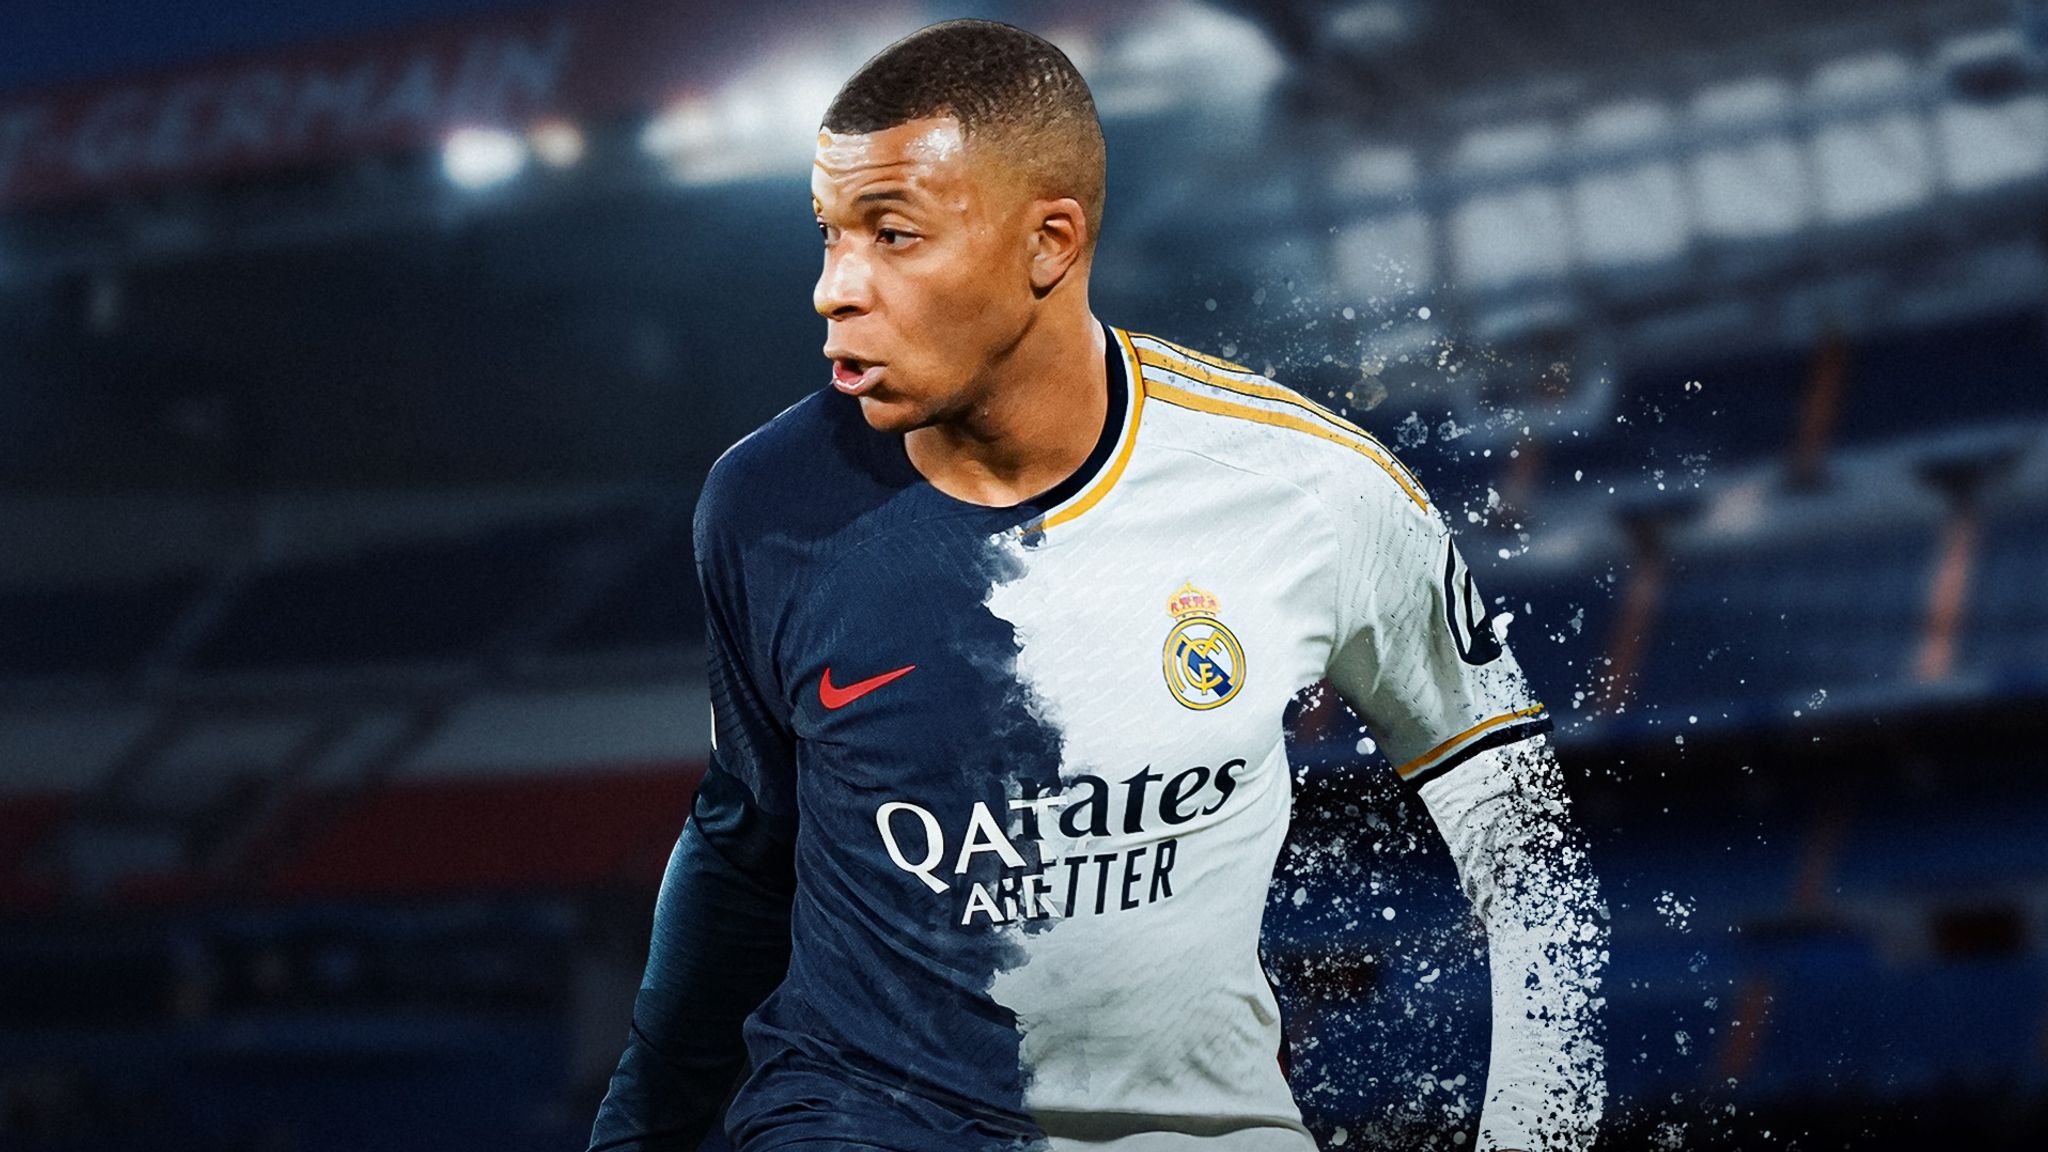 Kylian Mbappé Declares Departure from PSG, Paving the Way for Expected Real Madrid Transfer